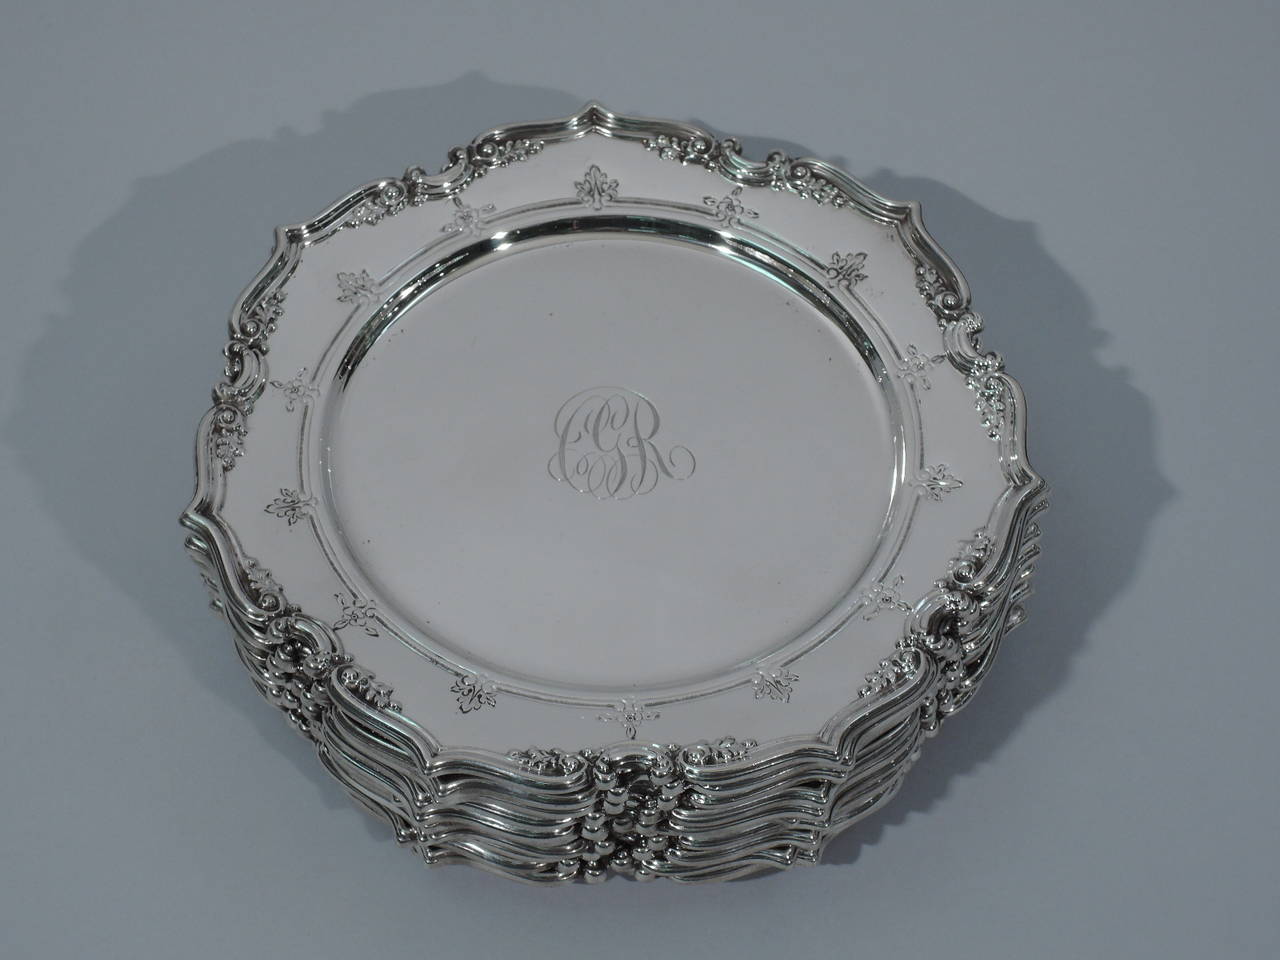 20th Century Set of 12 Gorham Sterling Silver Bread and Butter Plates with Fancy Scrolls